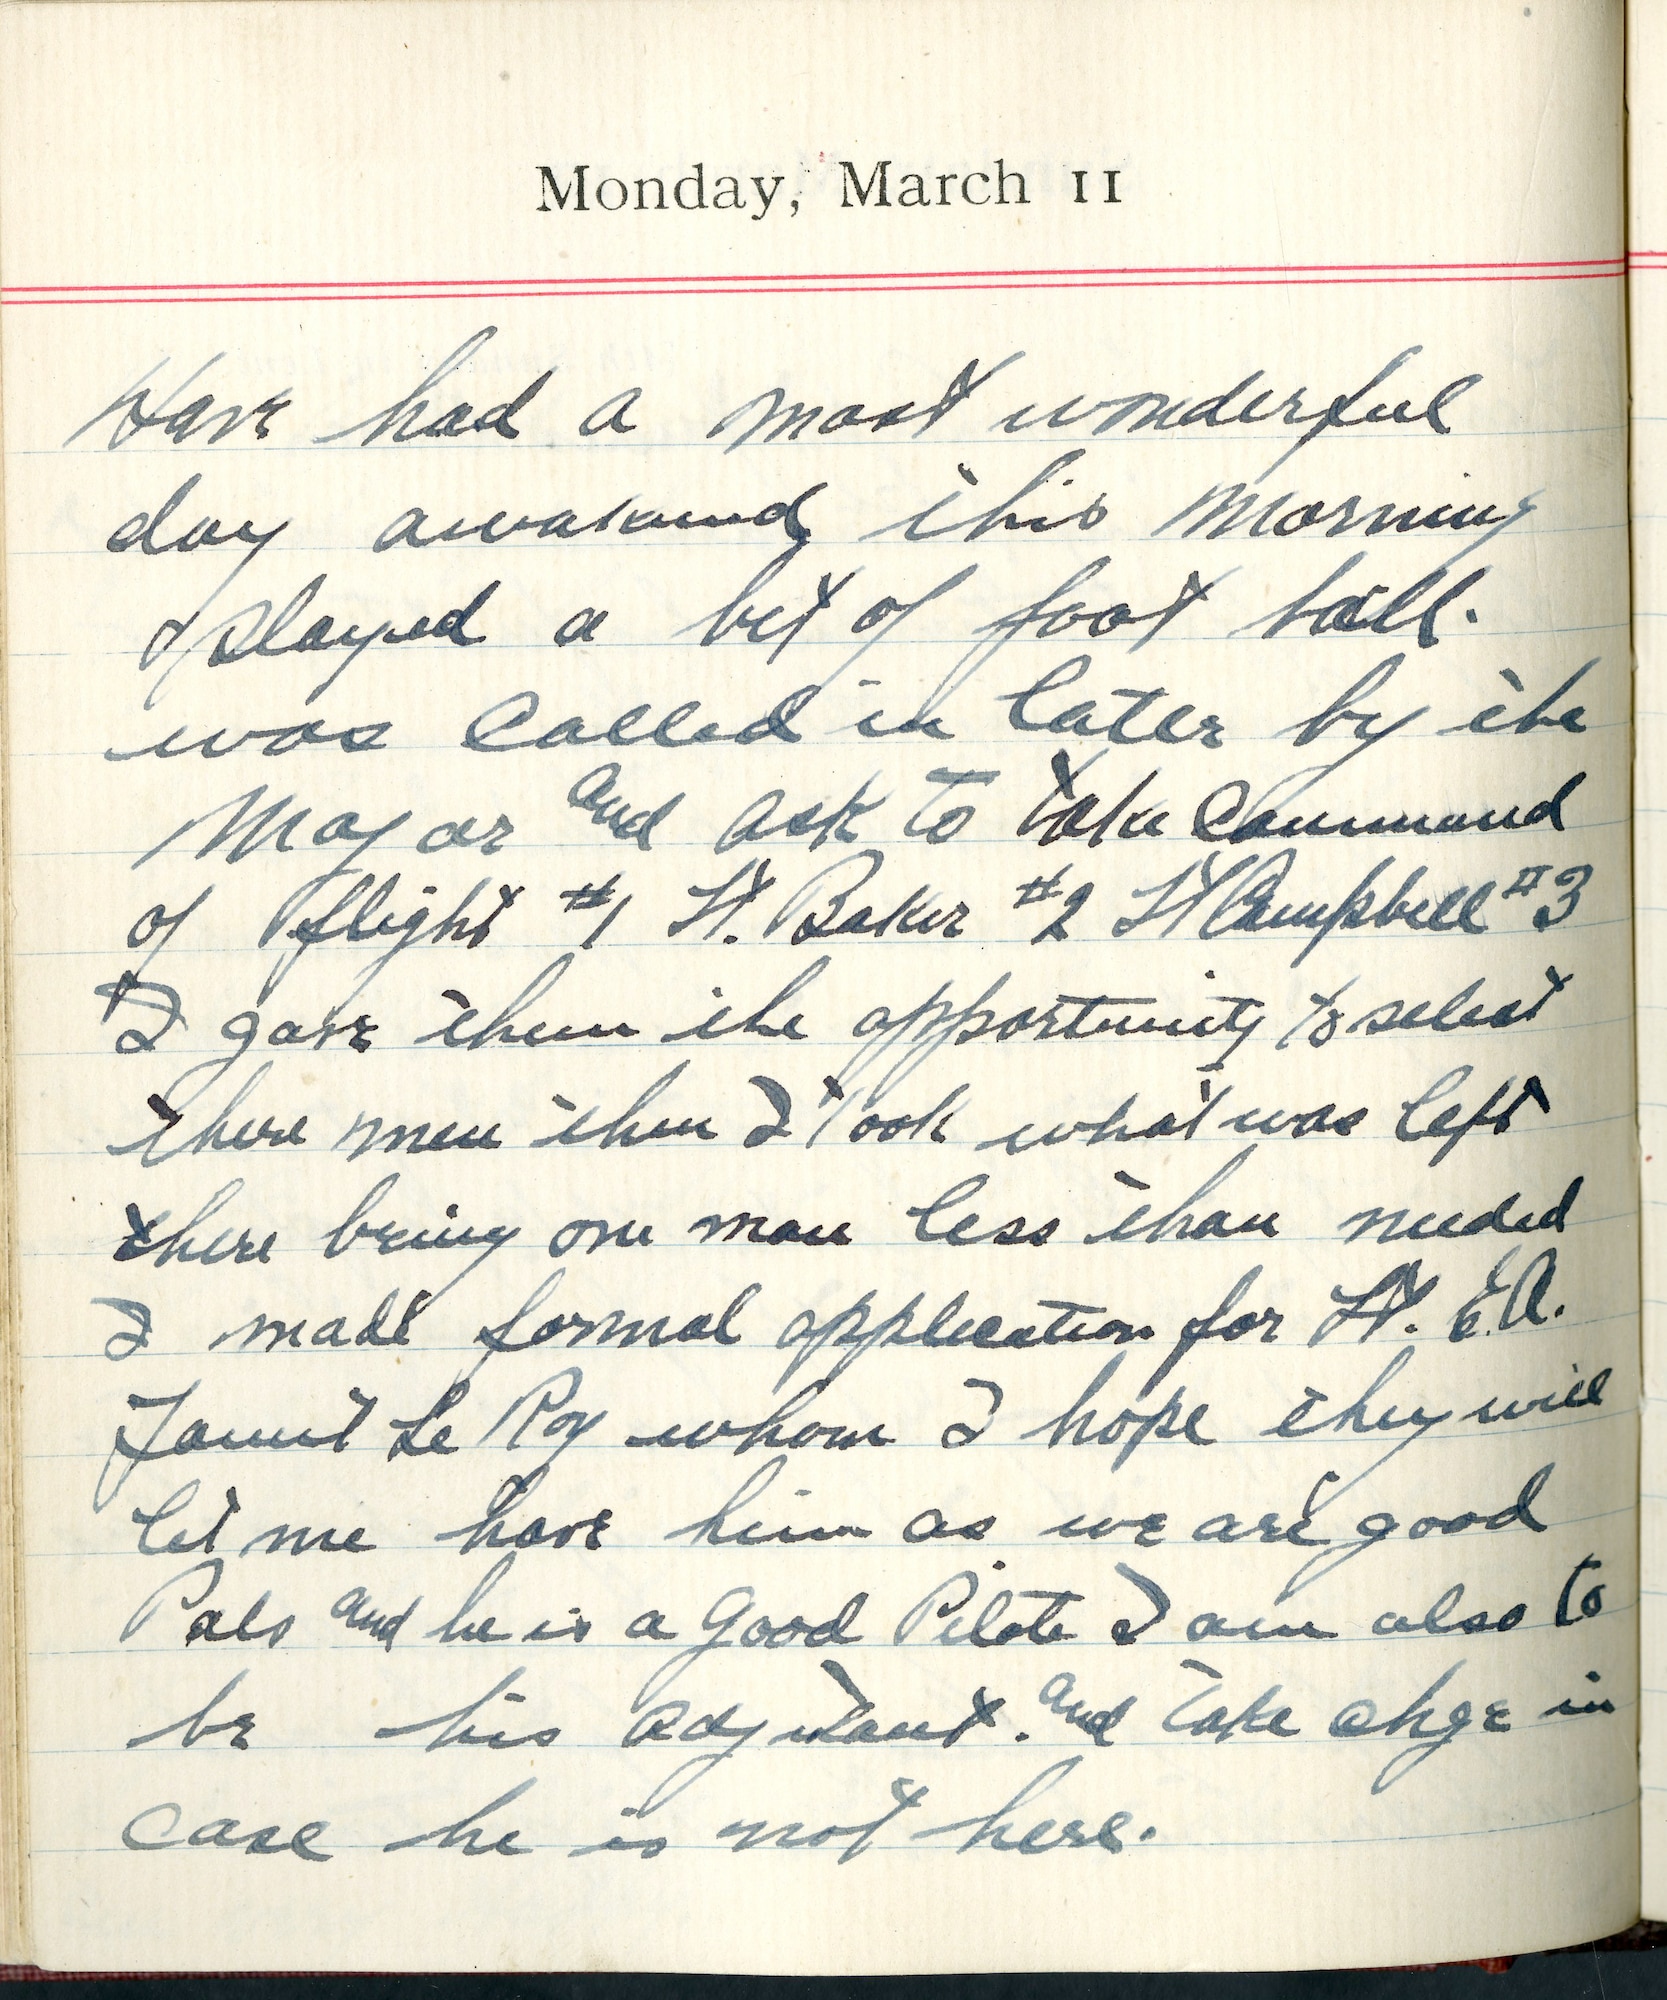 Capt. Edward V. Rickenbacker's 1918 wartime diary entry. (03/11/1918).

Have had a most wonderful day.  Awakened this morning and played a bit of football.  Was called in later by the Major and ask[ed] to take command of flight #1.  Lt. Baker #2.  Lt. Campbell #3.  I gave them the opportunity to select their men.  Then I took what was left, there being one man less than needed.  I made formal application for Lt. E.A. Faunt Le Roy [Lt. Cedric E. Fauntleroy] whom I hope they will let me have him as we are good pals and he is a good pilot.  I aim also to be his adjutant and take charge in case he is not here.